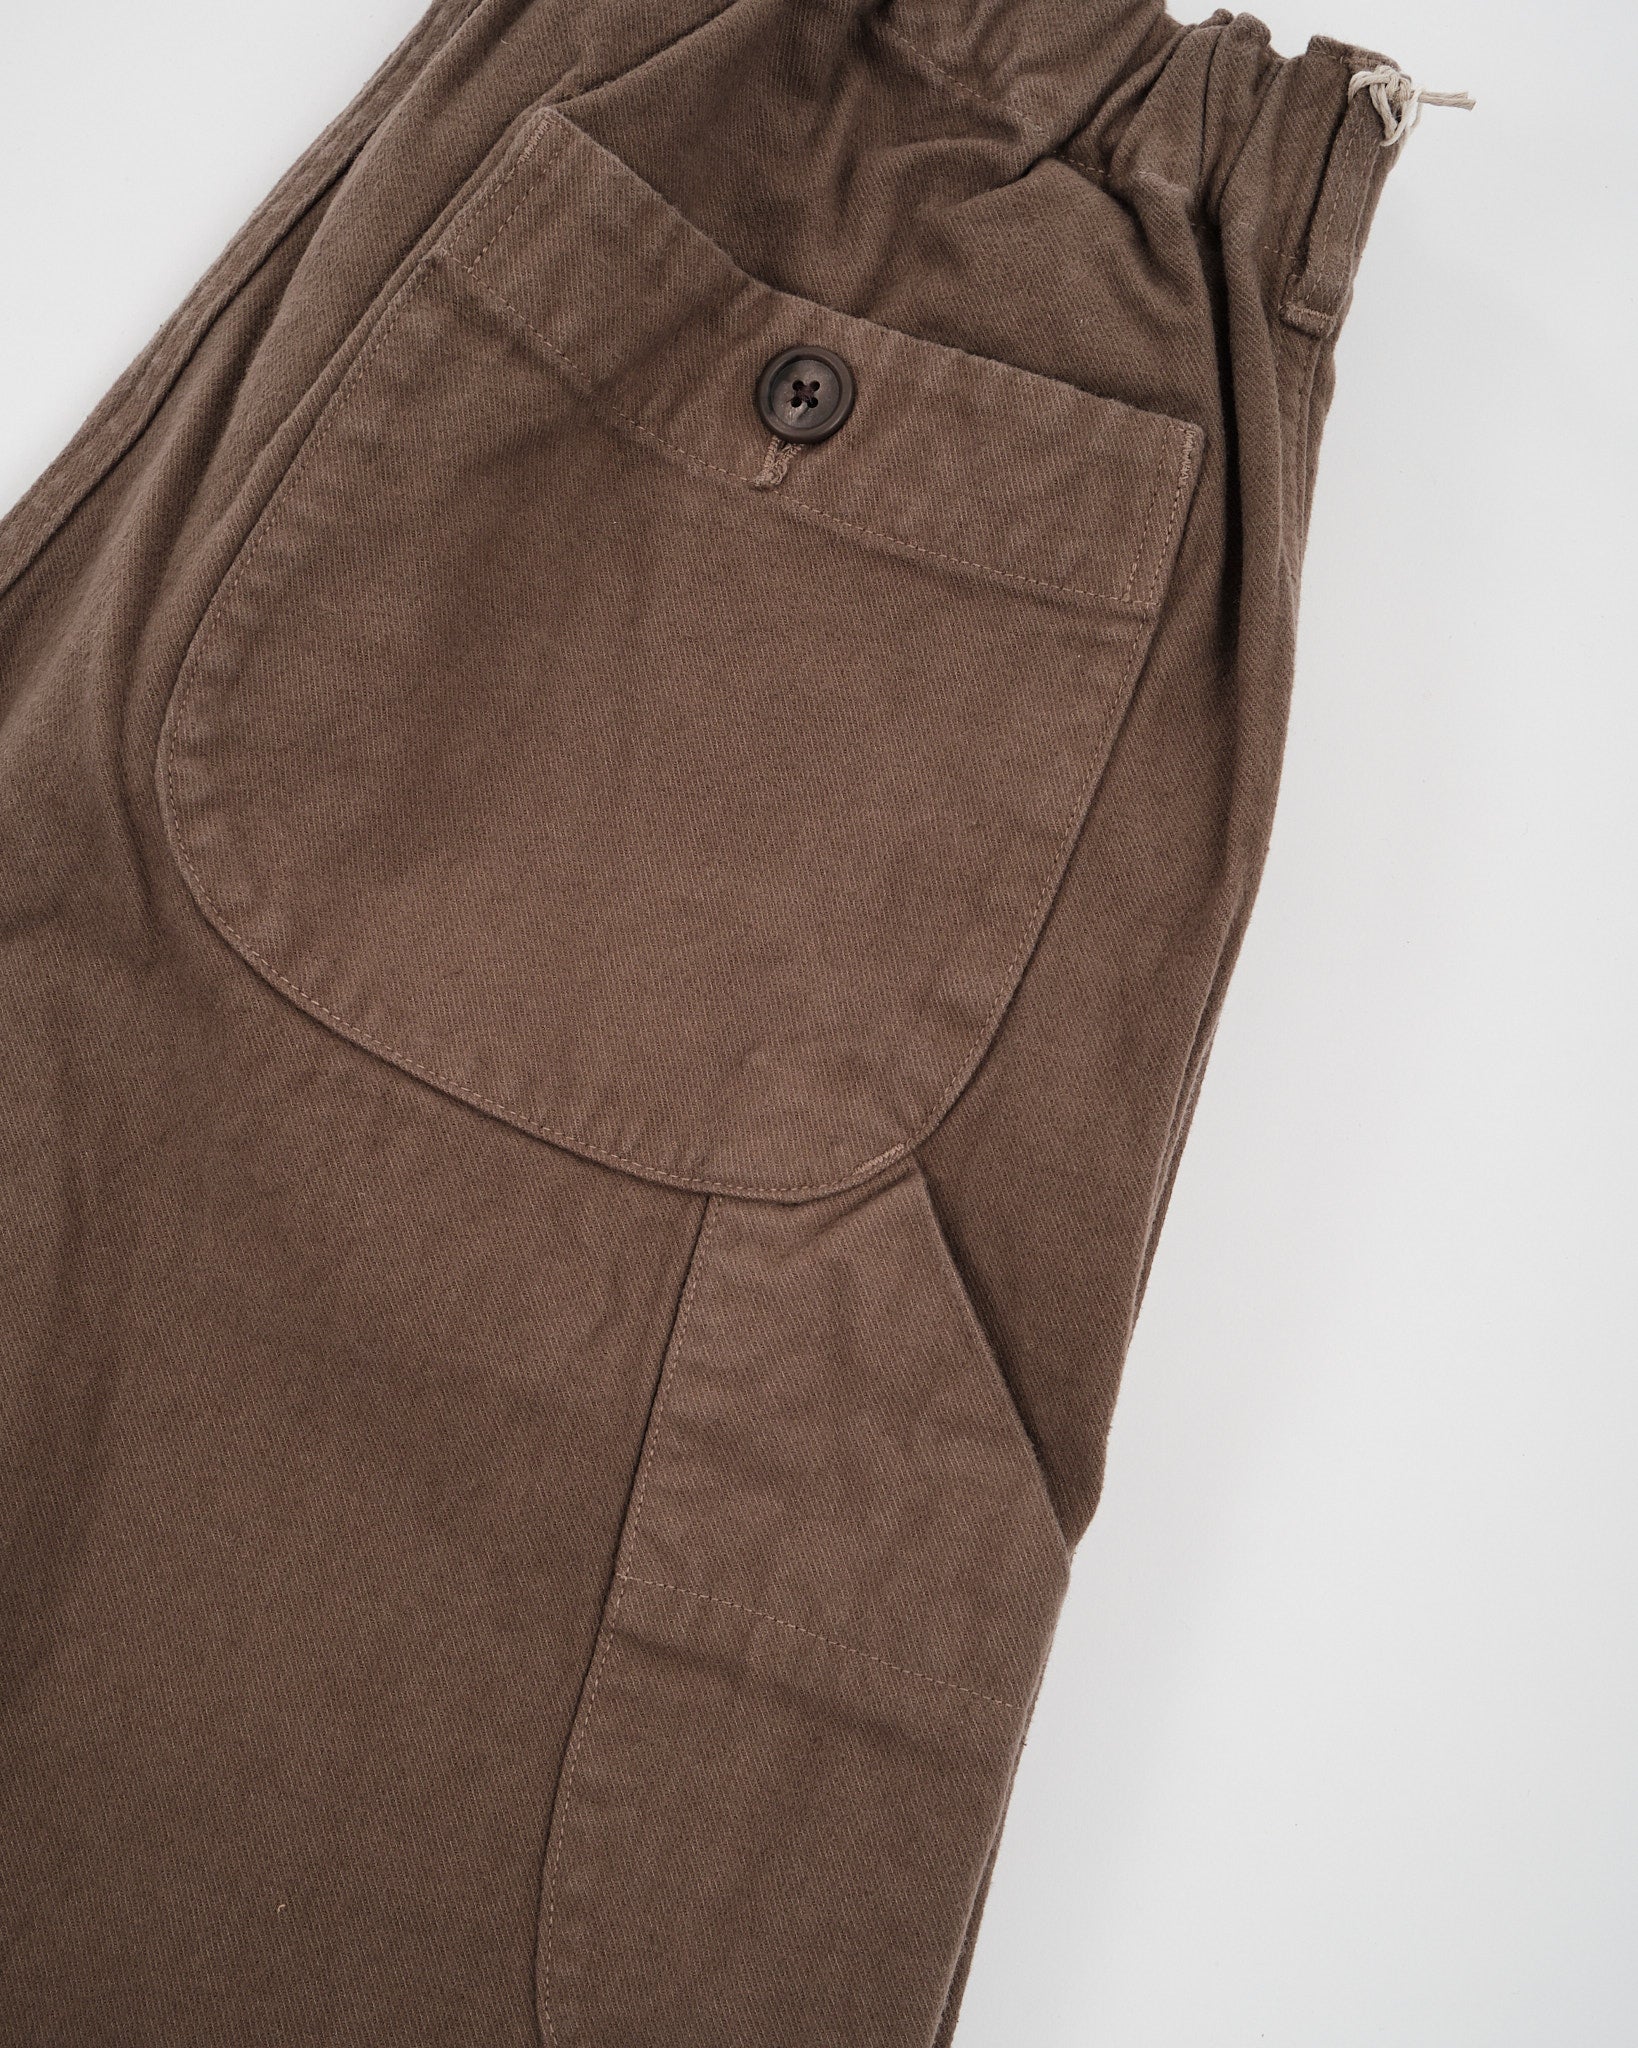 FRENCH WORK PANTS ROSE GRAY - Meadow